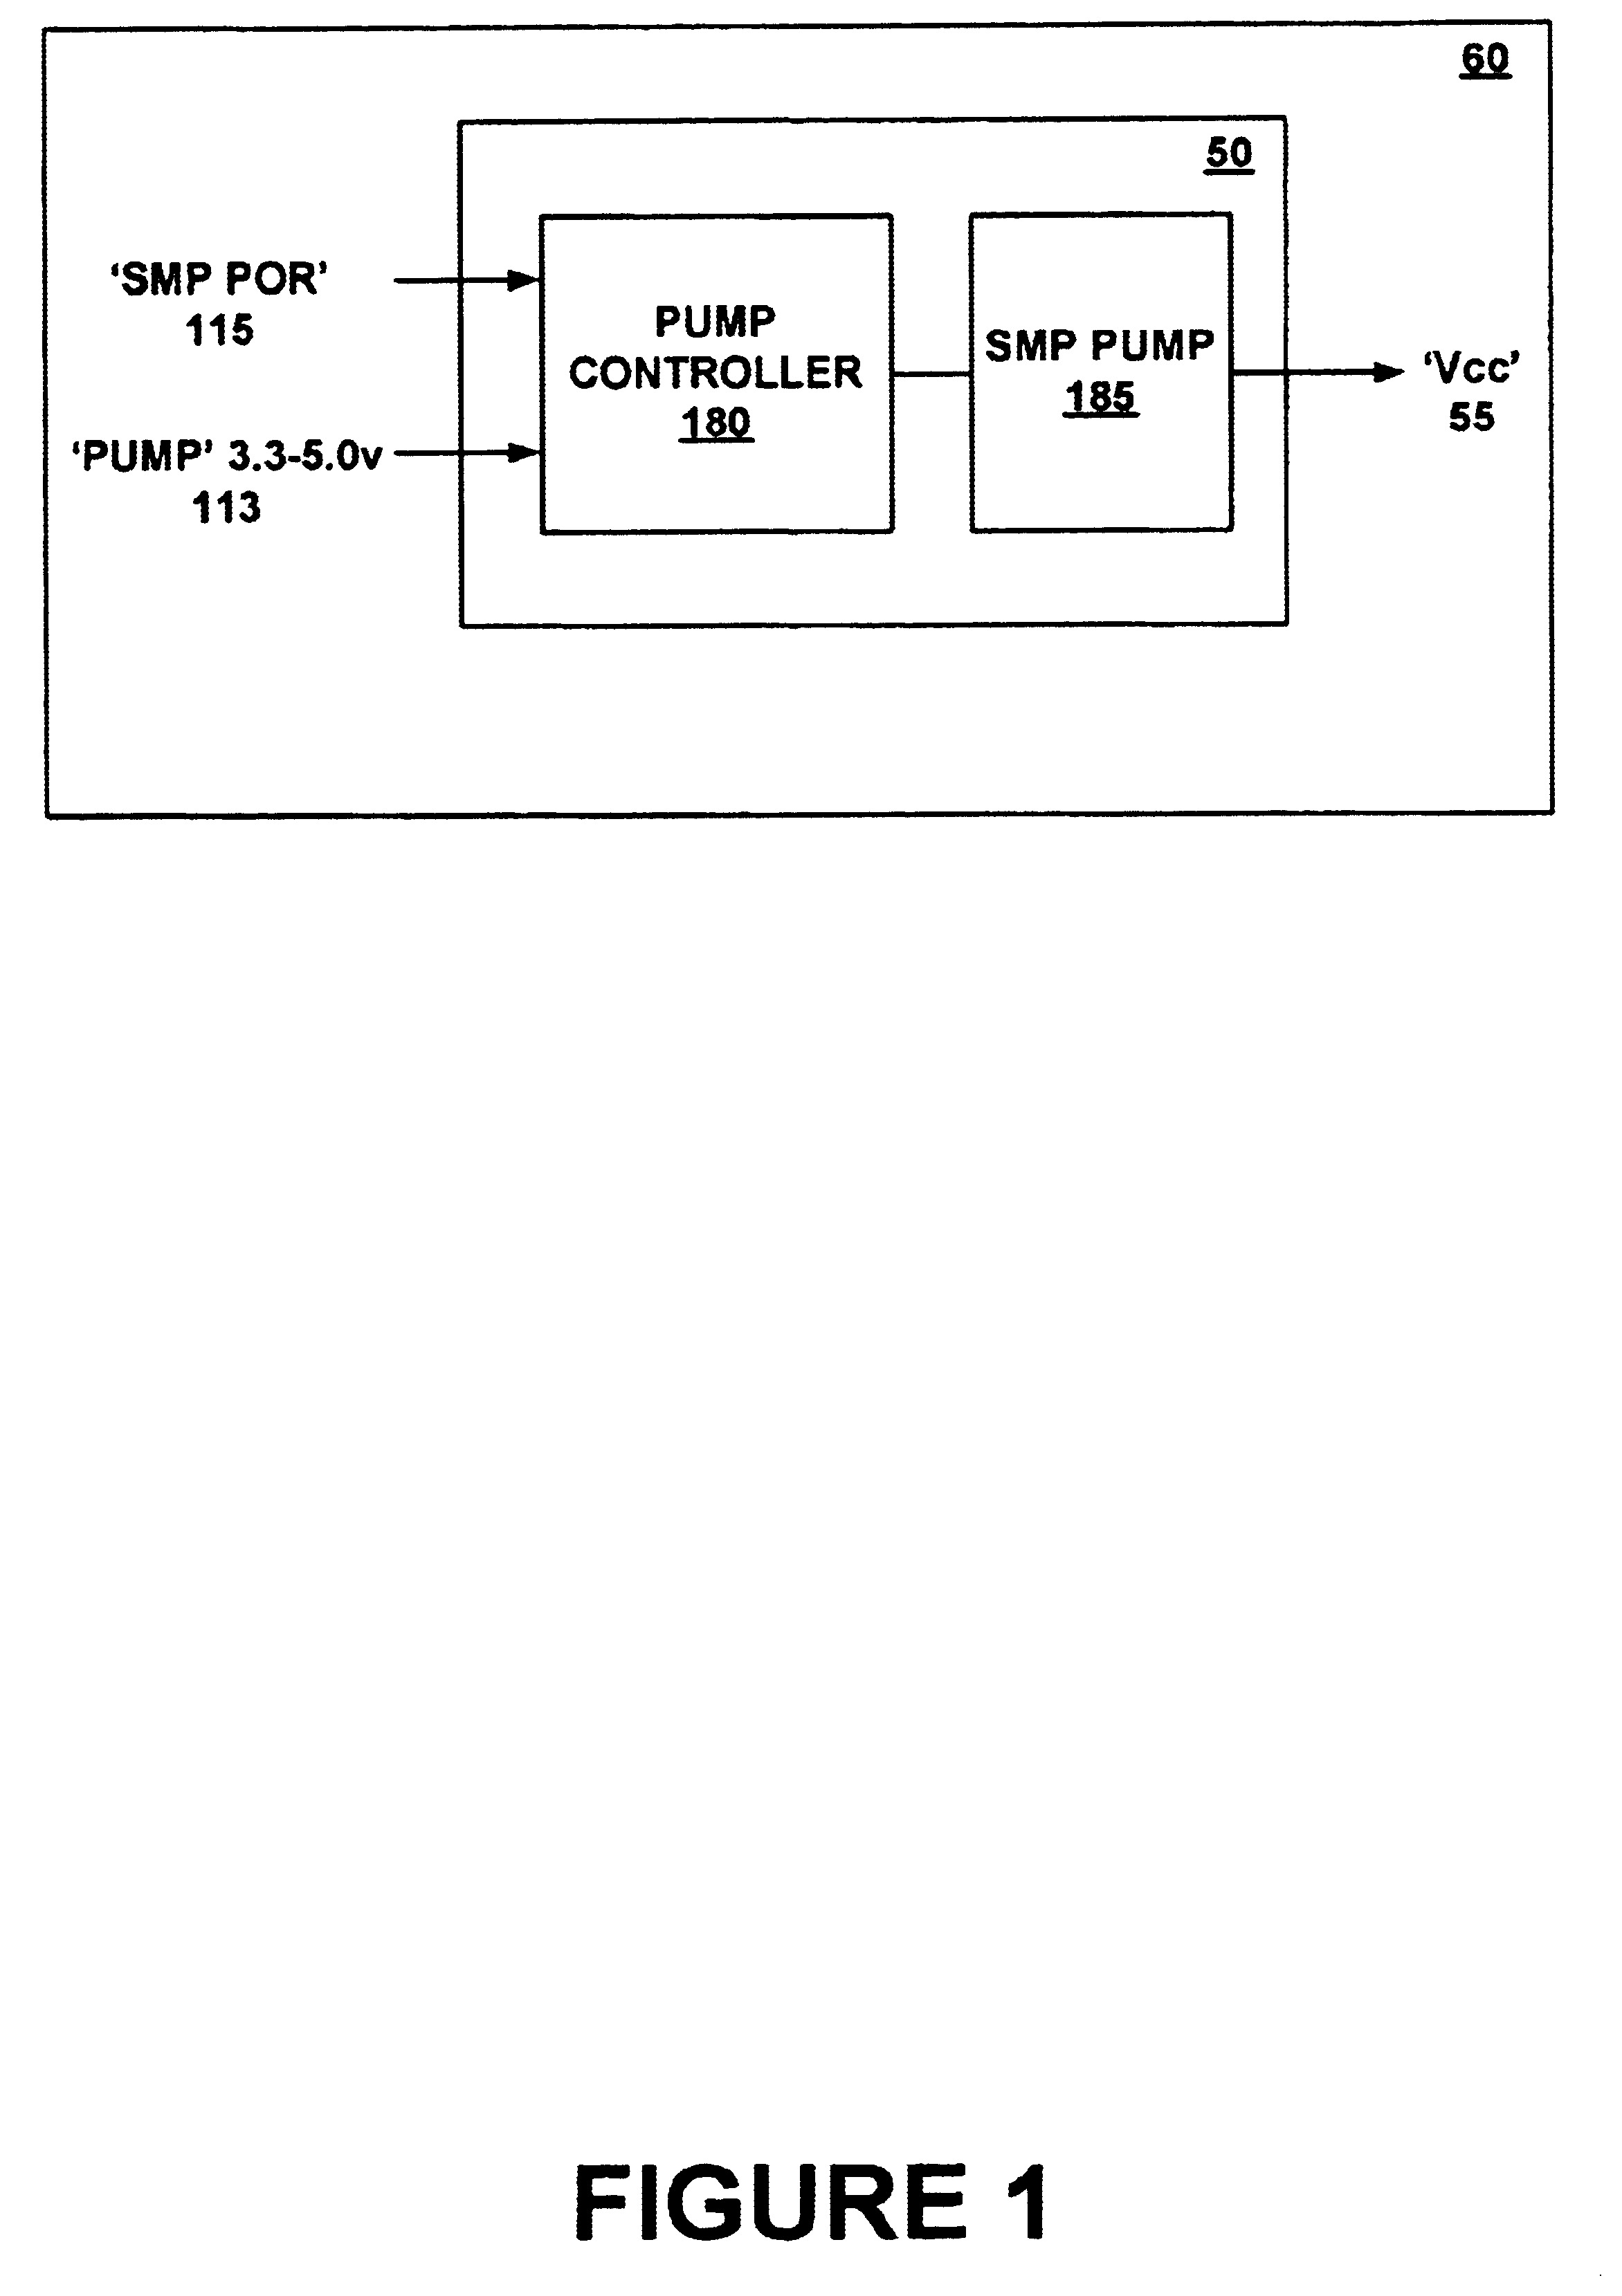 Method and system for interaction between a processor and a power on reset circuit to dynamically control power states in a microcontroller